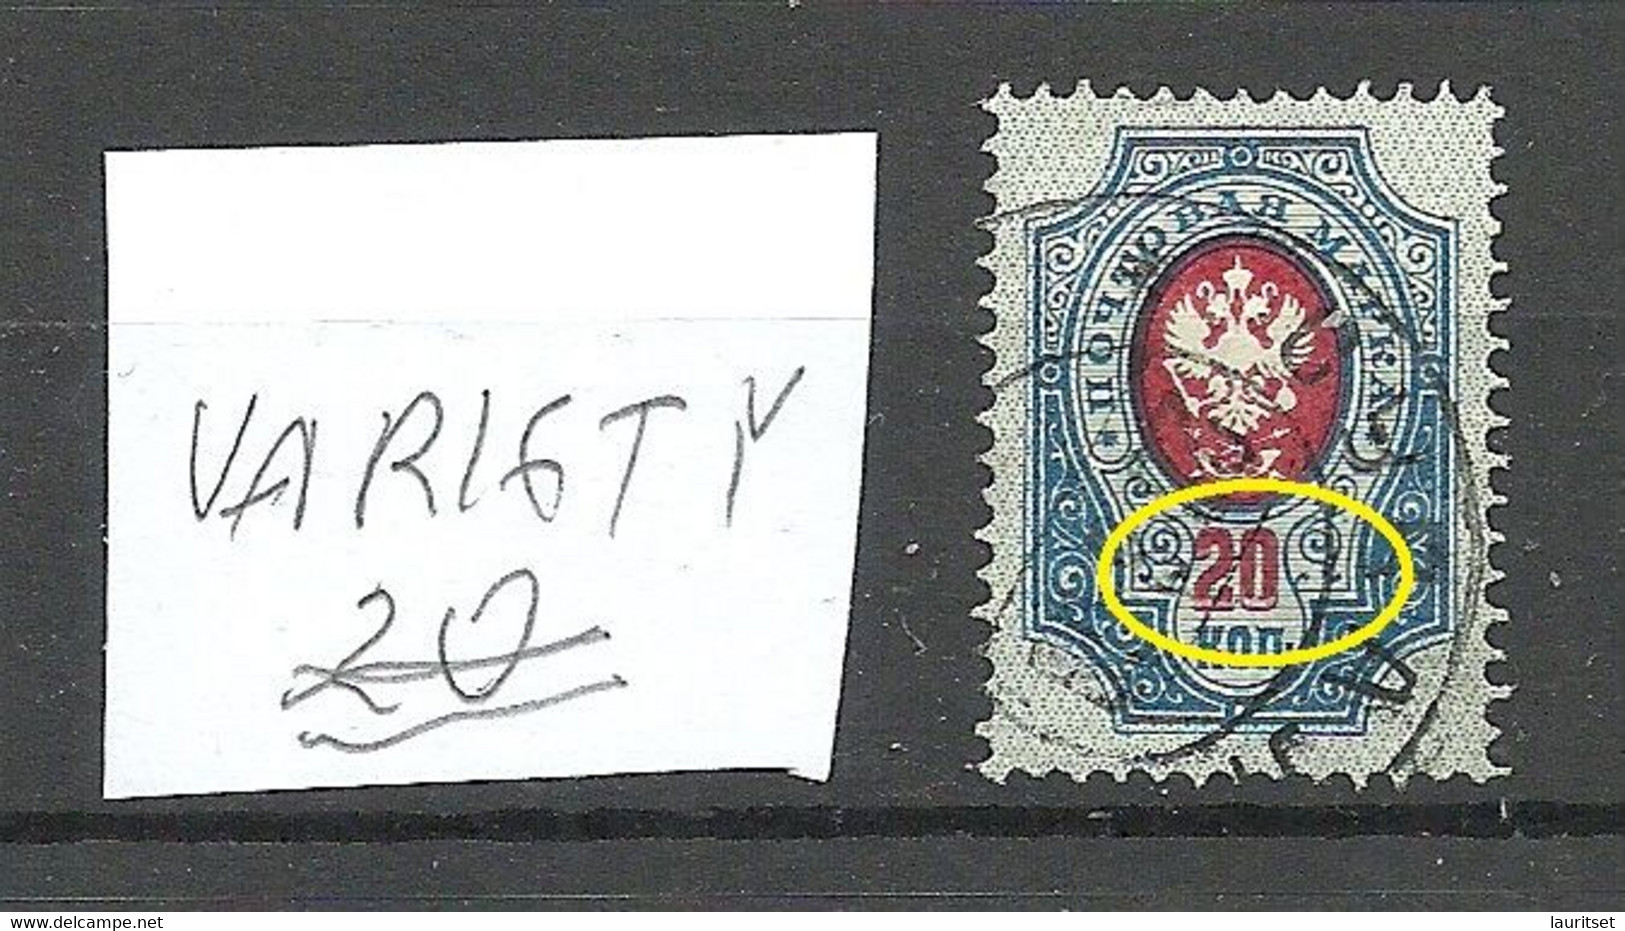 Russia Russie 1904 Michel 42 Y O Variety Abart ERROR = "20" Partly White - Errors & Oddities